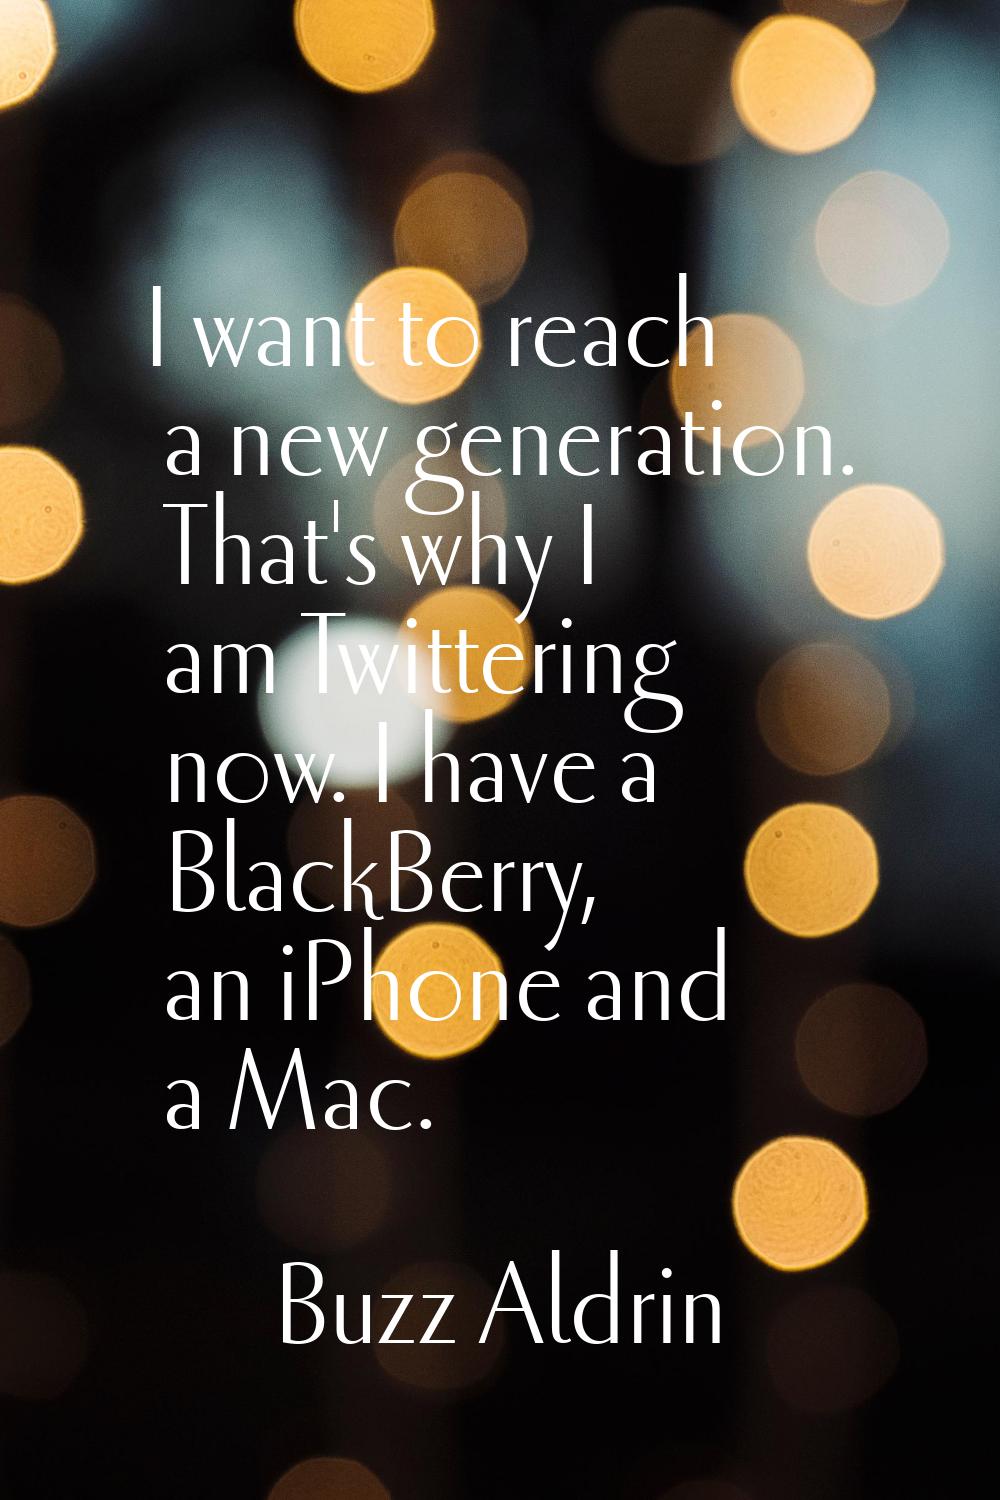 I want to reach a new generation. That's why I am Twittering now. I have a BlackBerry, an iPhone an